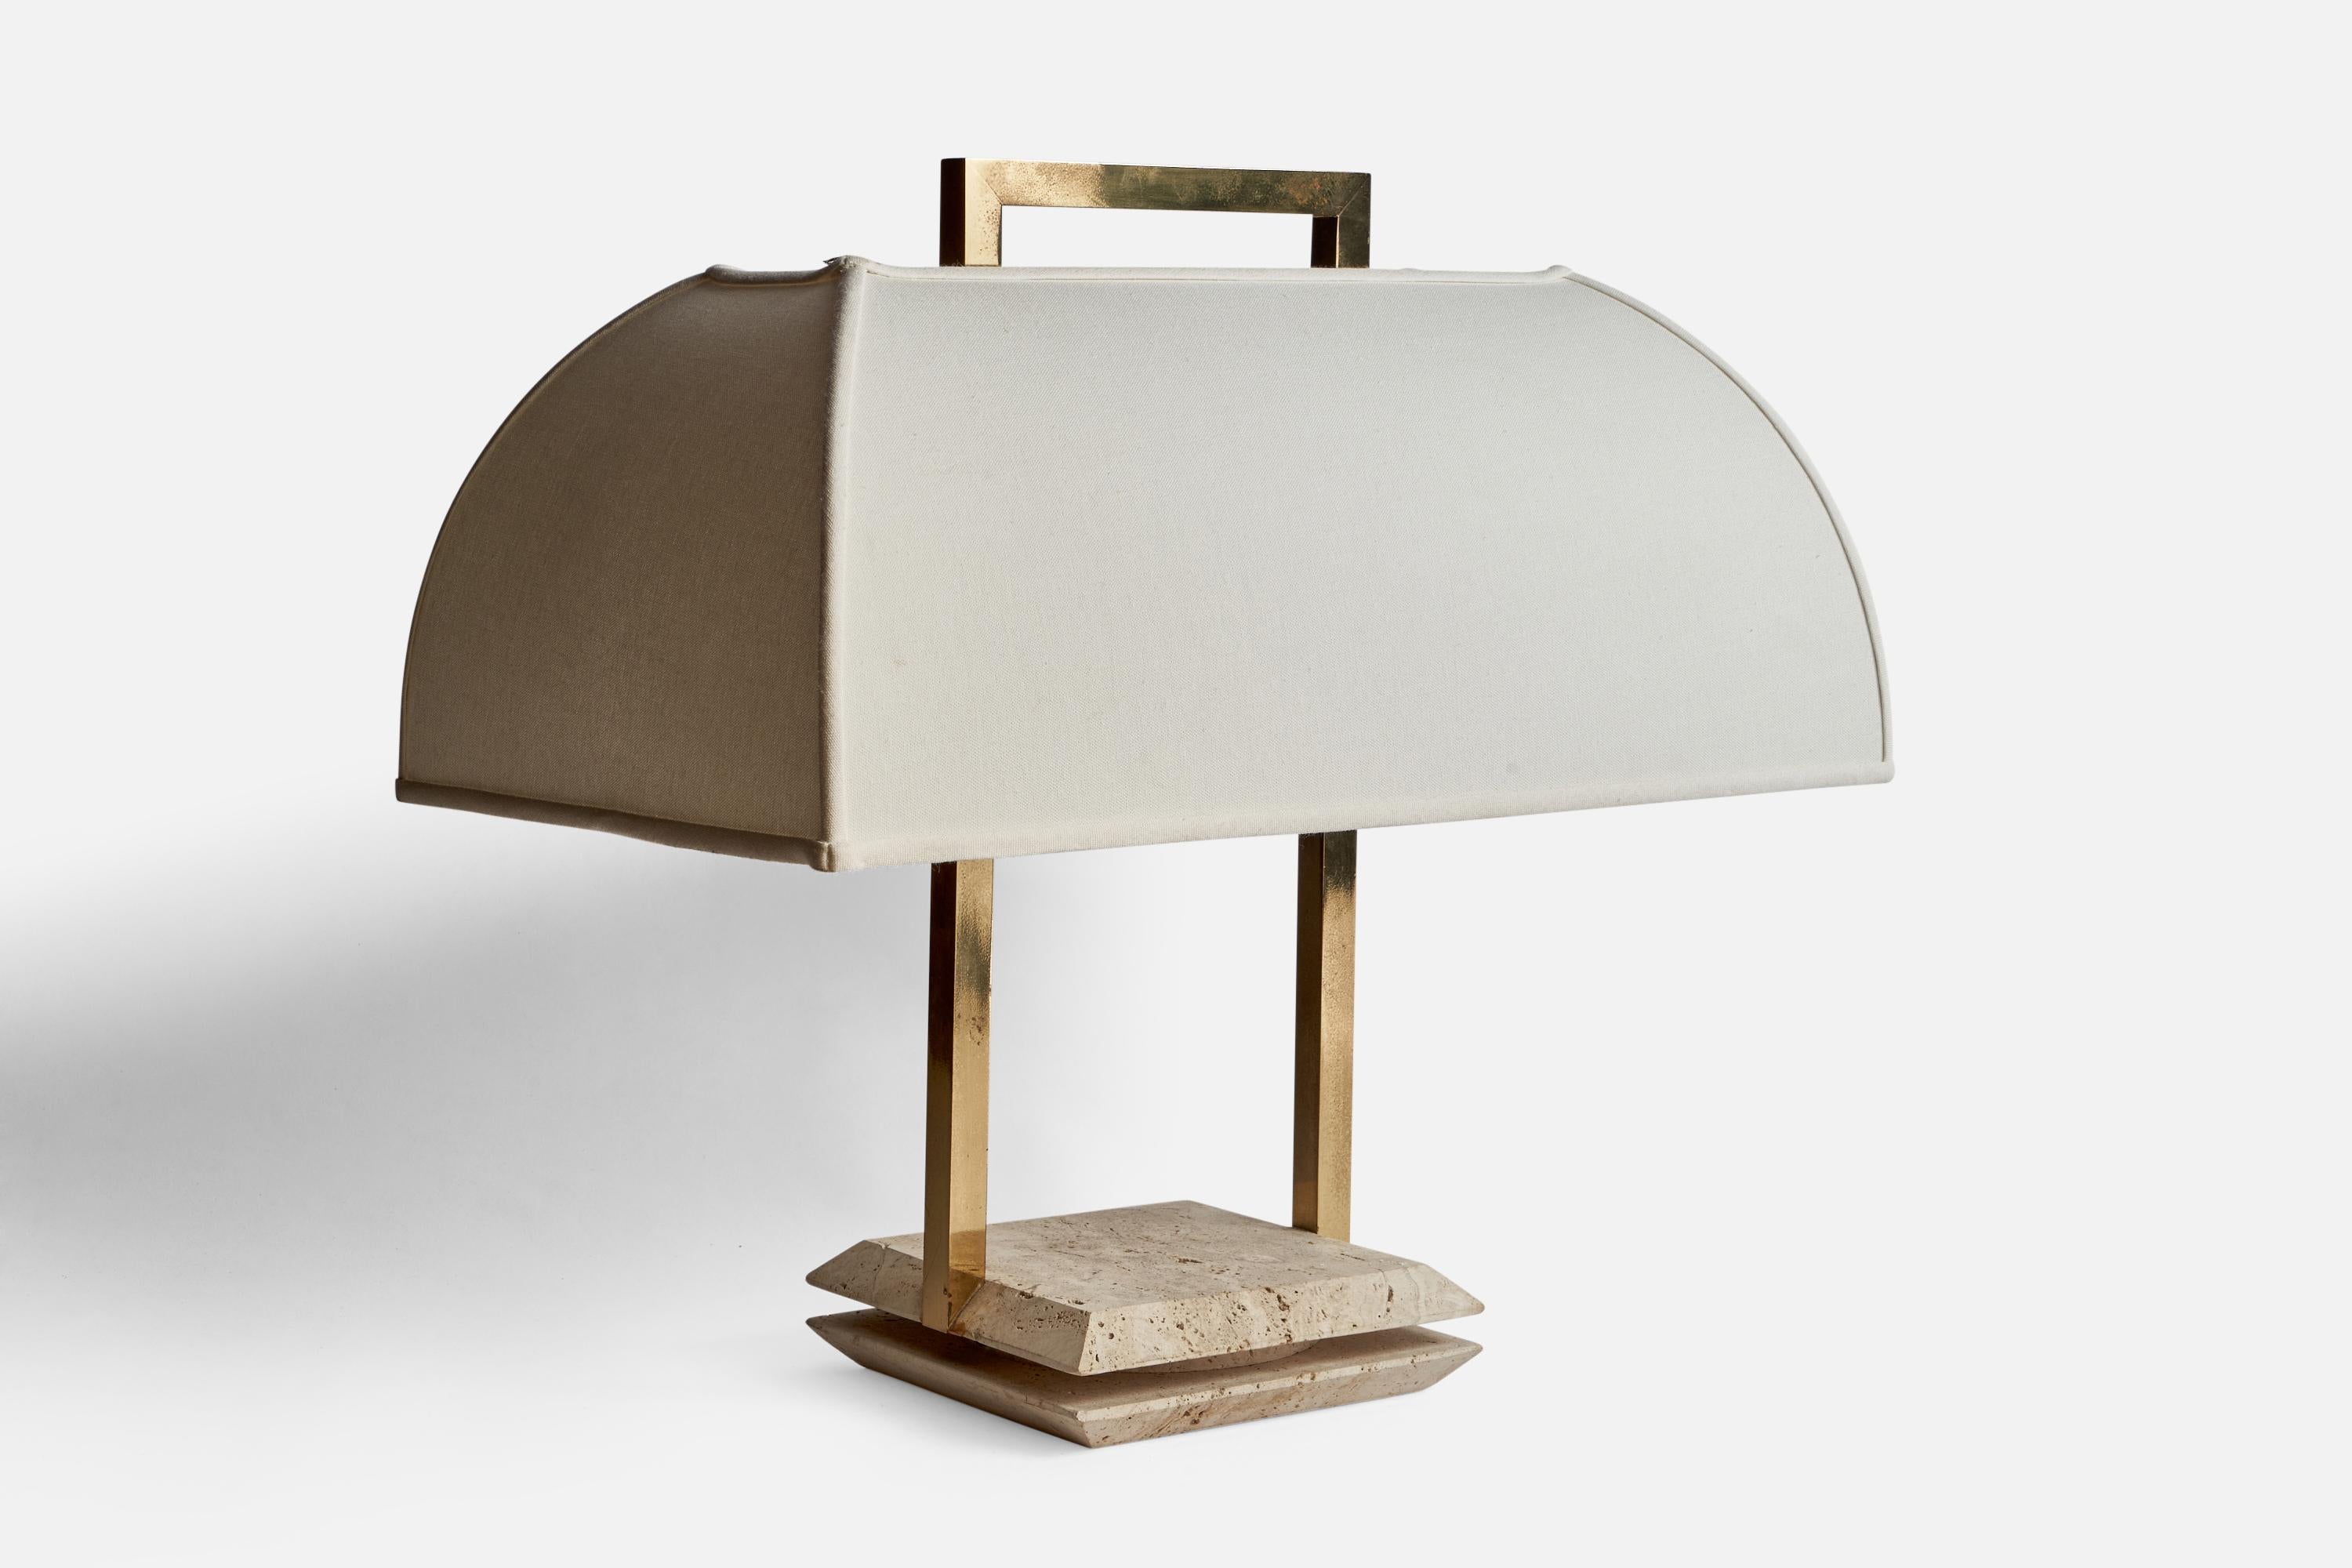 A sizeable brass, travertine and white fabric table lamp designed and produced in Italy, 1970s.

Overall Dimensions (inches): 19.55” H x 20.38” W x 12.38” D
Bulb Specifications: E-26 Bulbs
Number of Sockets: 2
All lighting will be converted for US